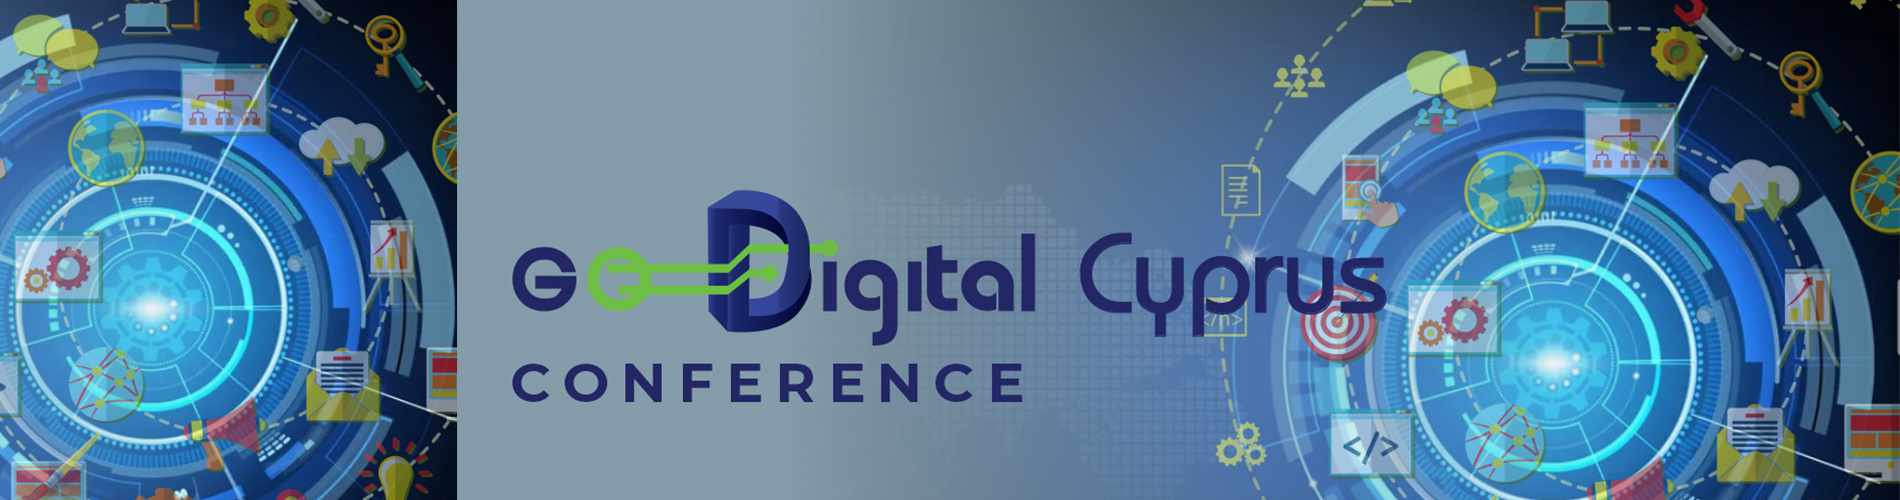 Go Digital Cyprus Conference  / 24th of September